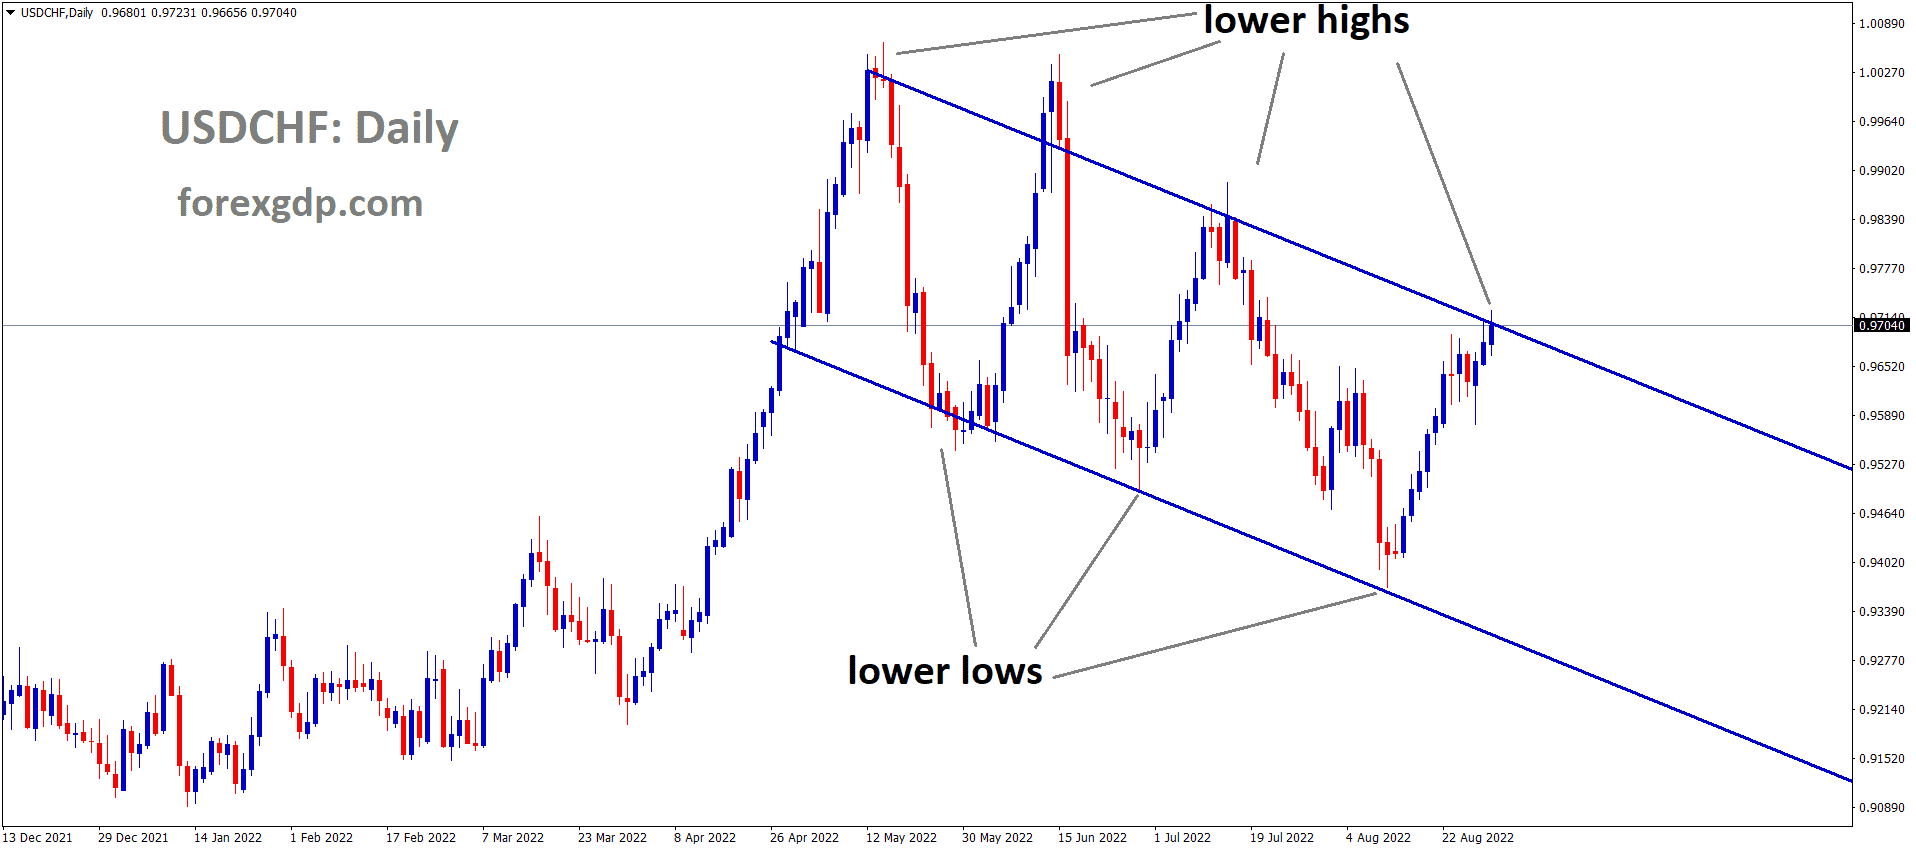 USDCHF is moving in the Descending channel and the Market has reached the Lower high area of the channel 3